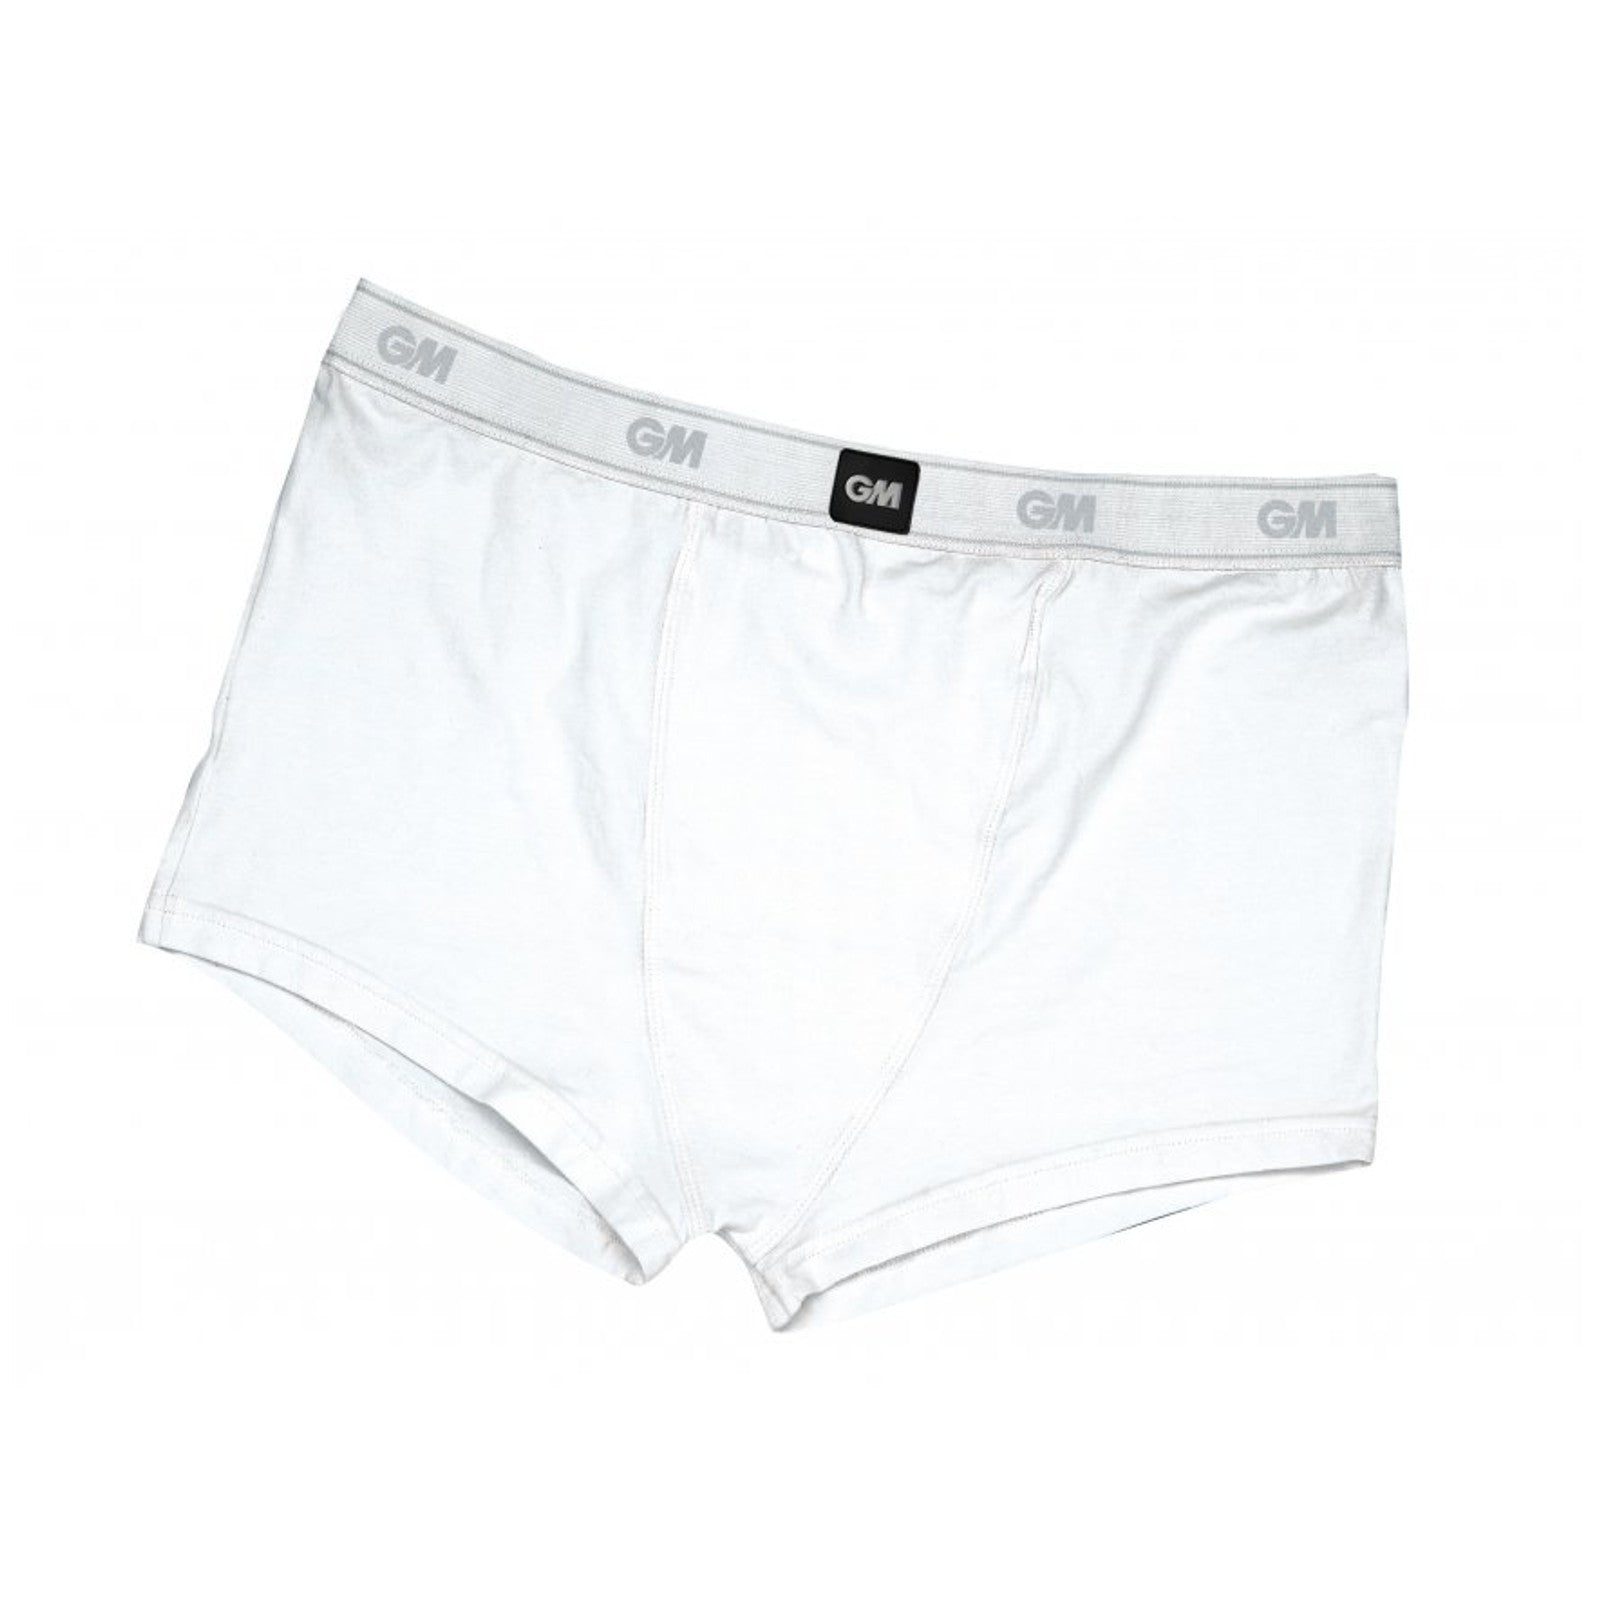 Gunn & Moore Cricket Boxer Short with Pouch Underwear Pants 